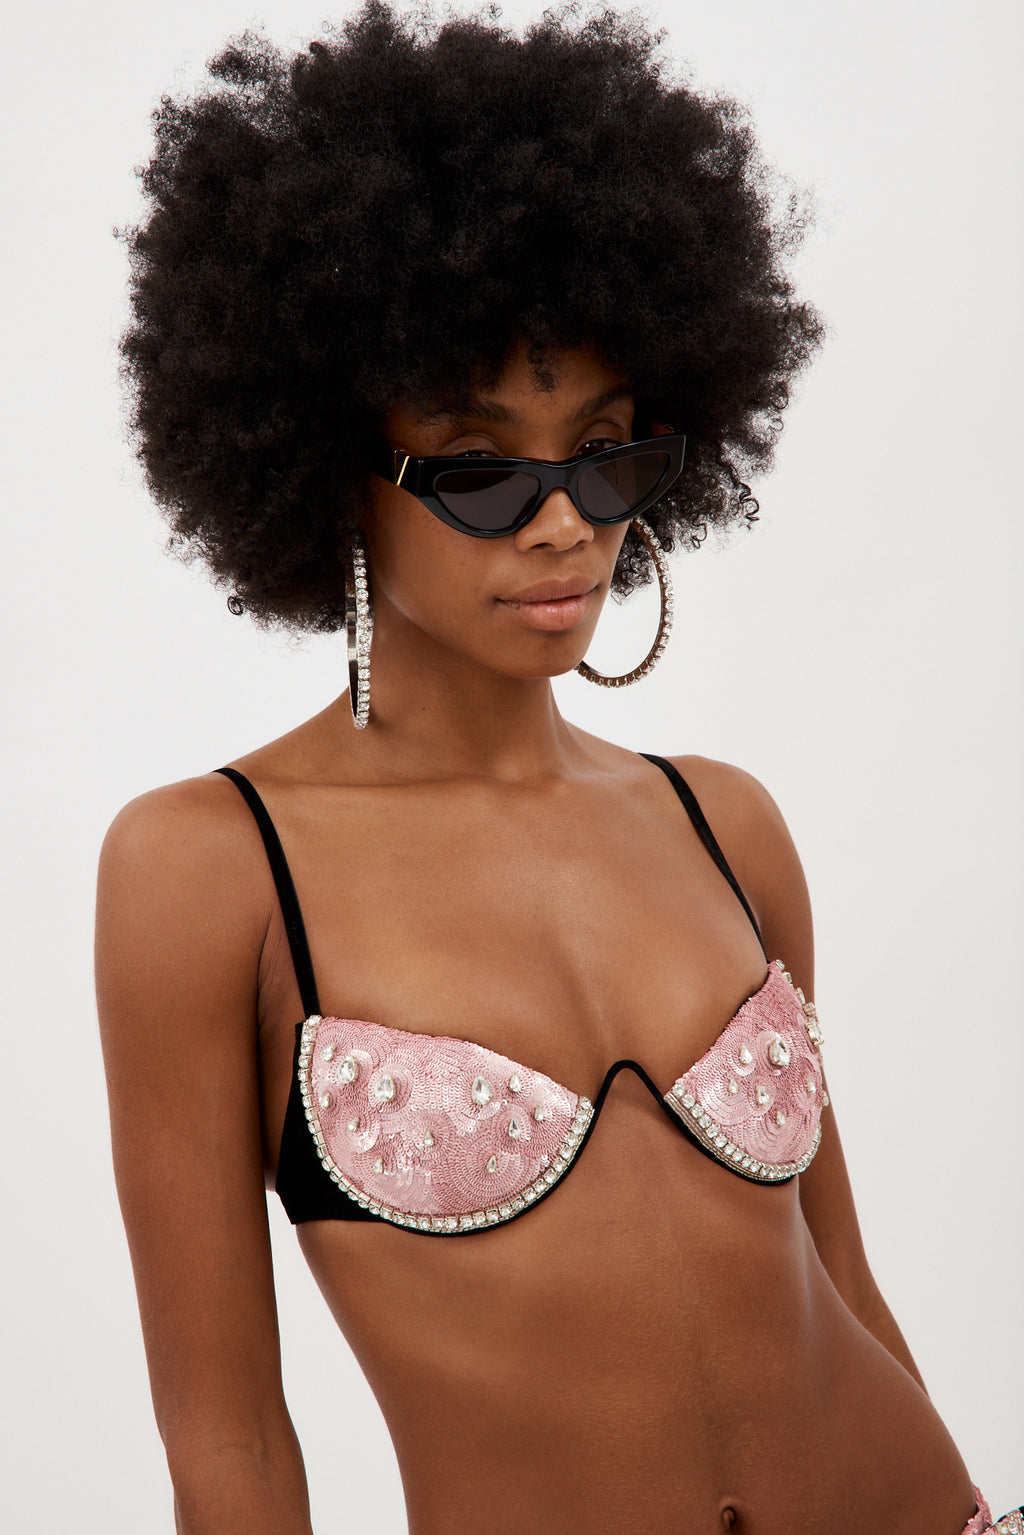 Embroidered Crystal Pailette Pink Watermelon Bra